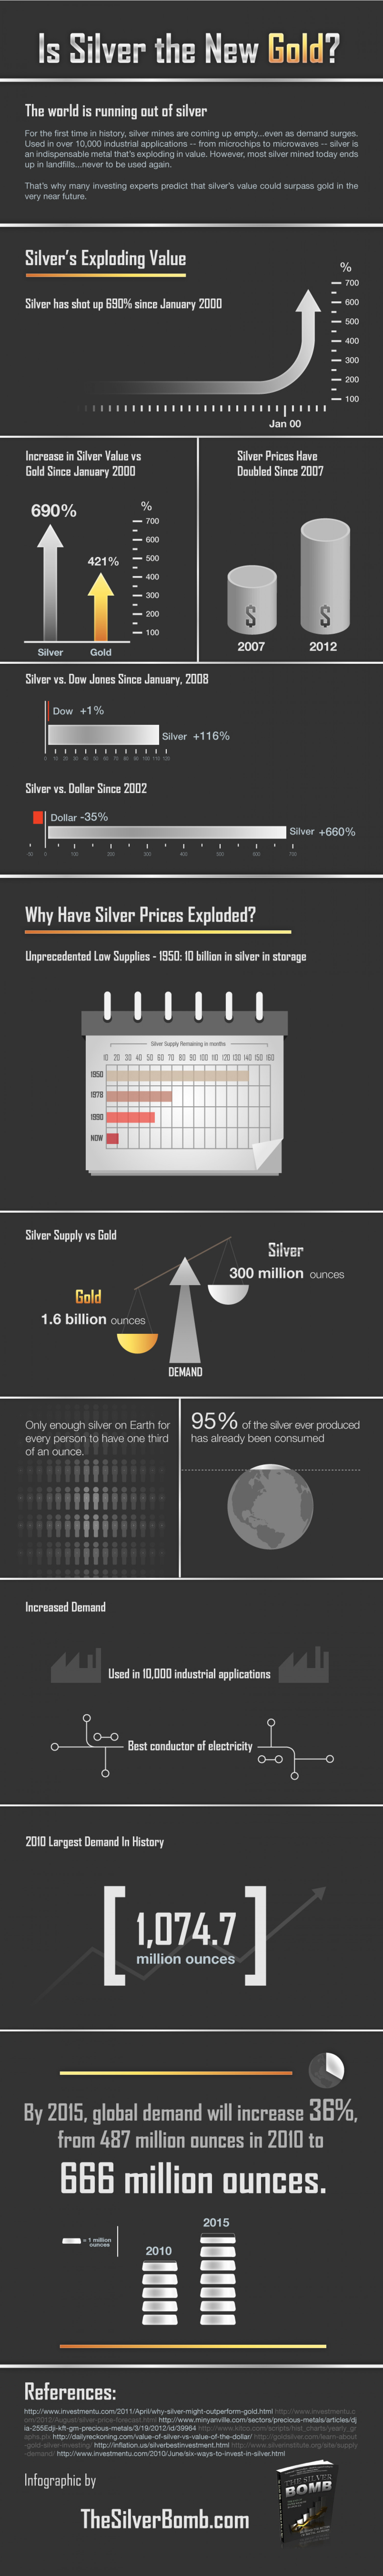 Is Silver the New Gold? Infographic